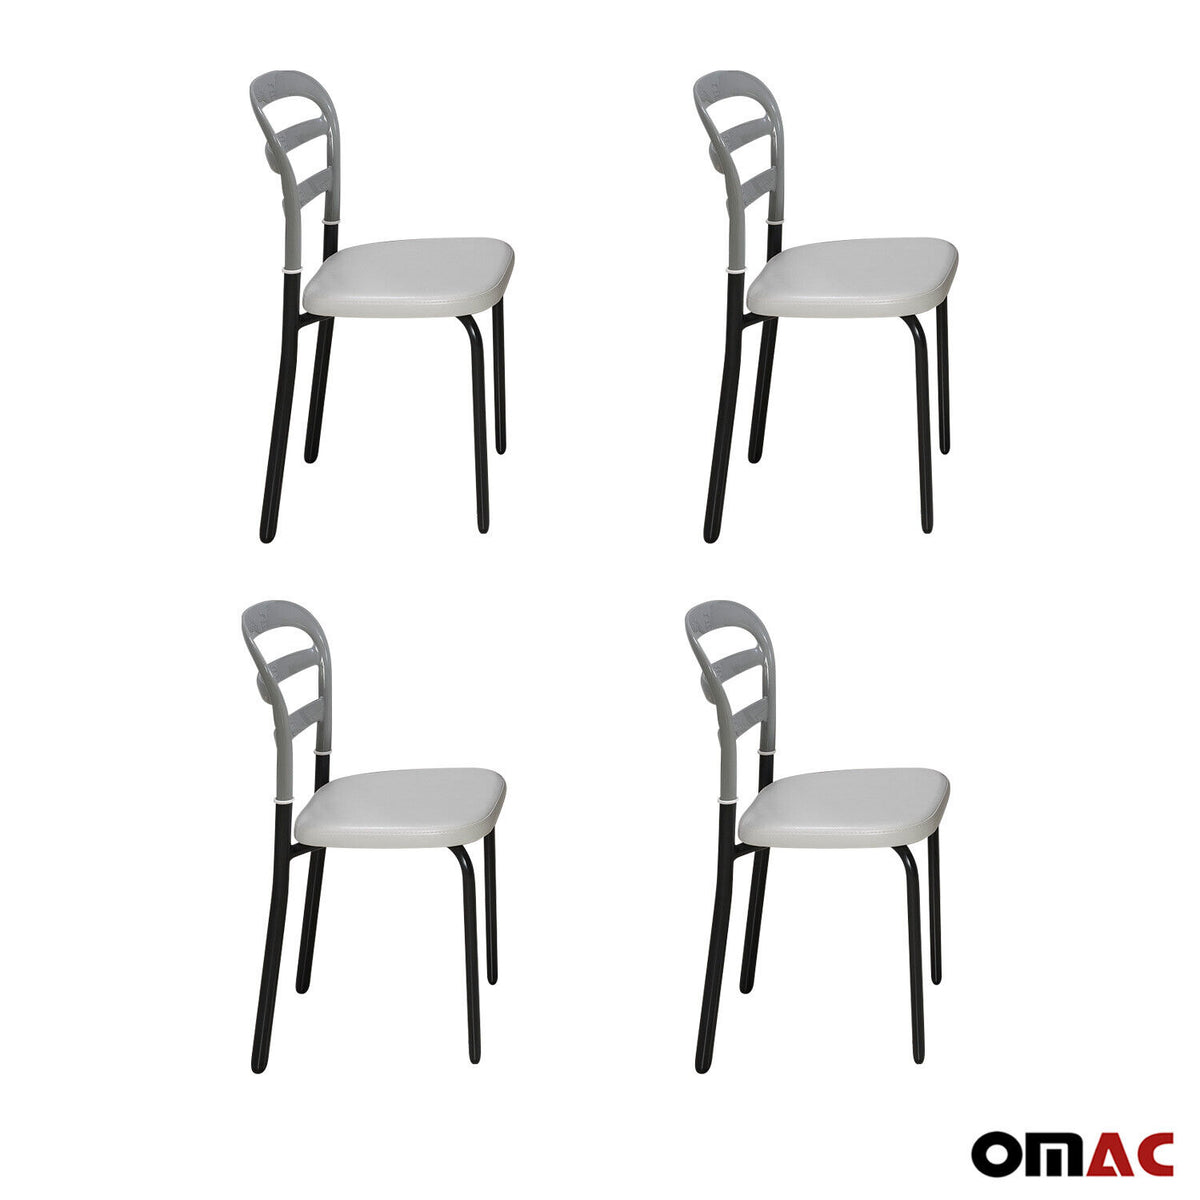 Dining room chairs kitchen chair gray 4x chairs faux leather